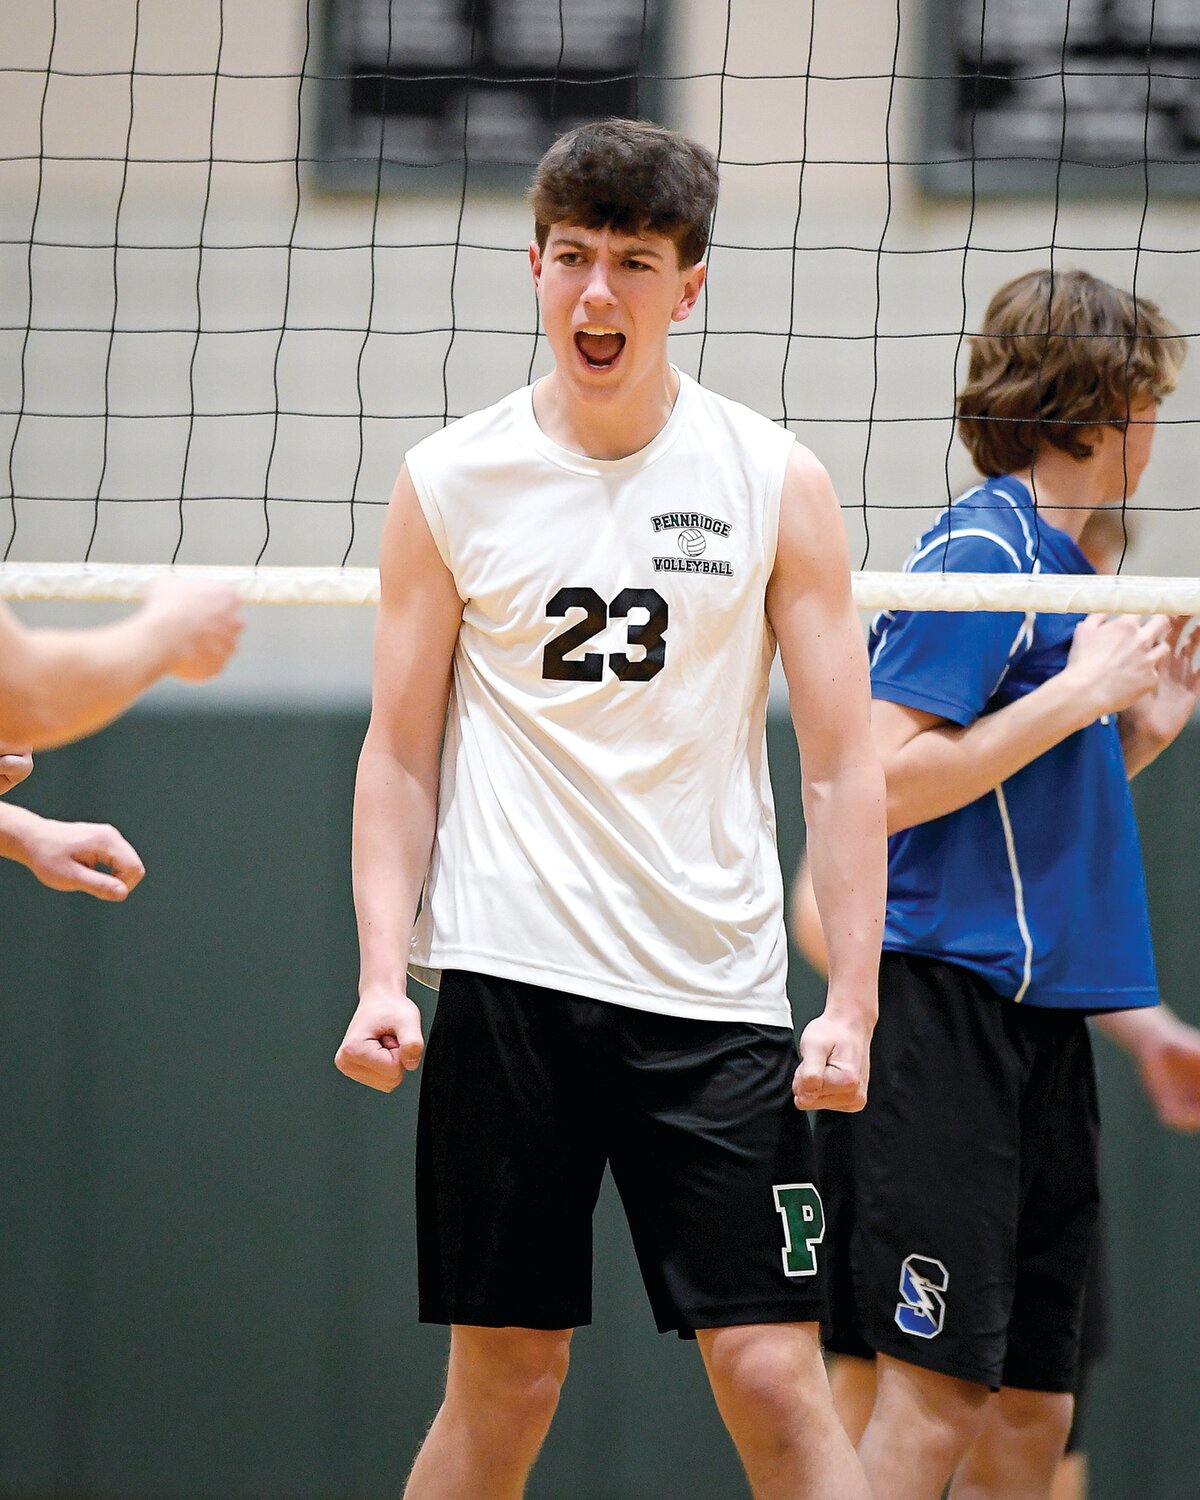 Pennridge’s Chris Cullen reacts after a key point in the closely contested third set.